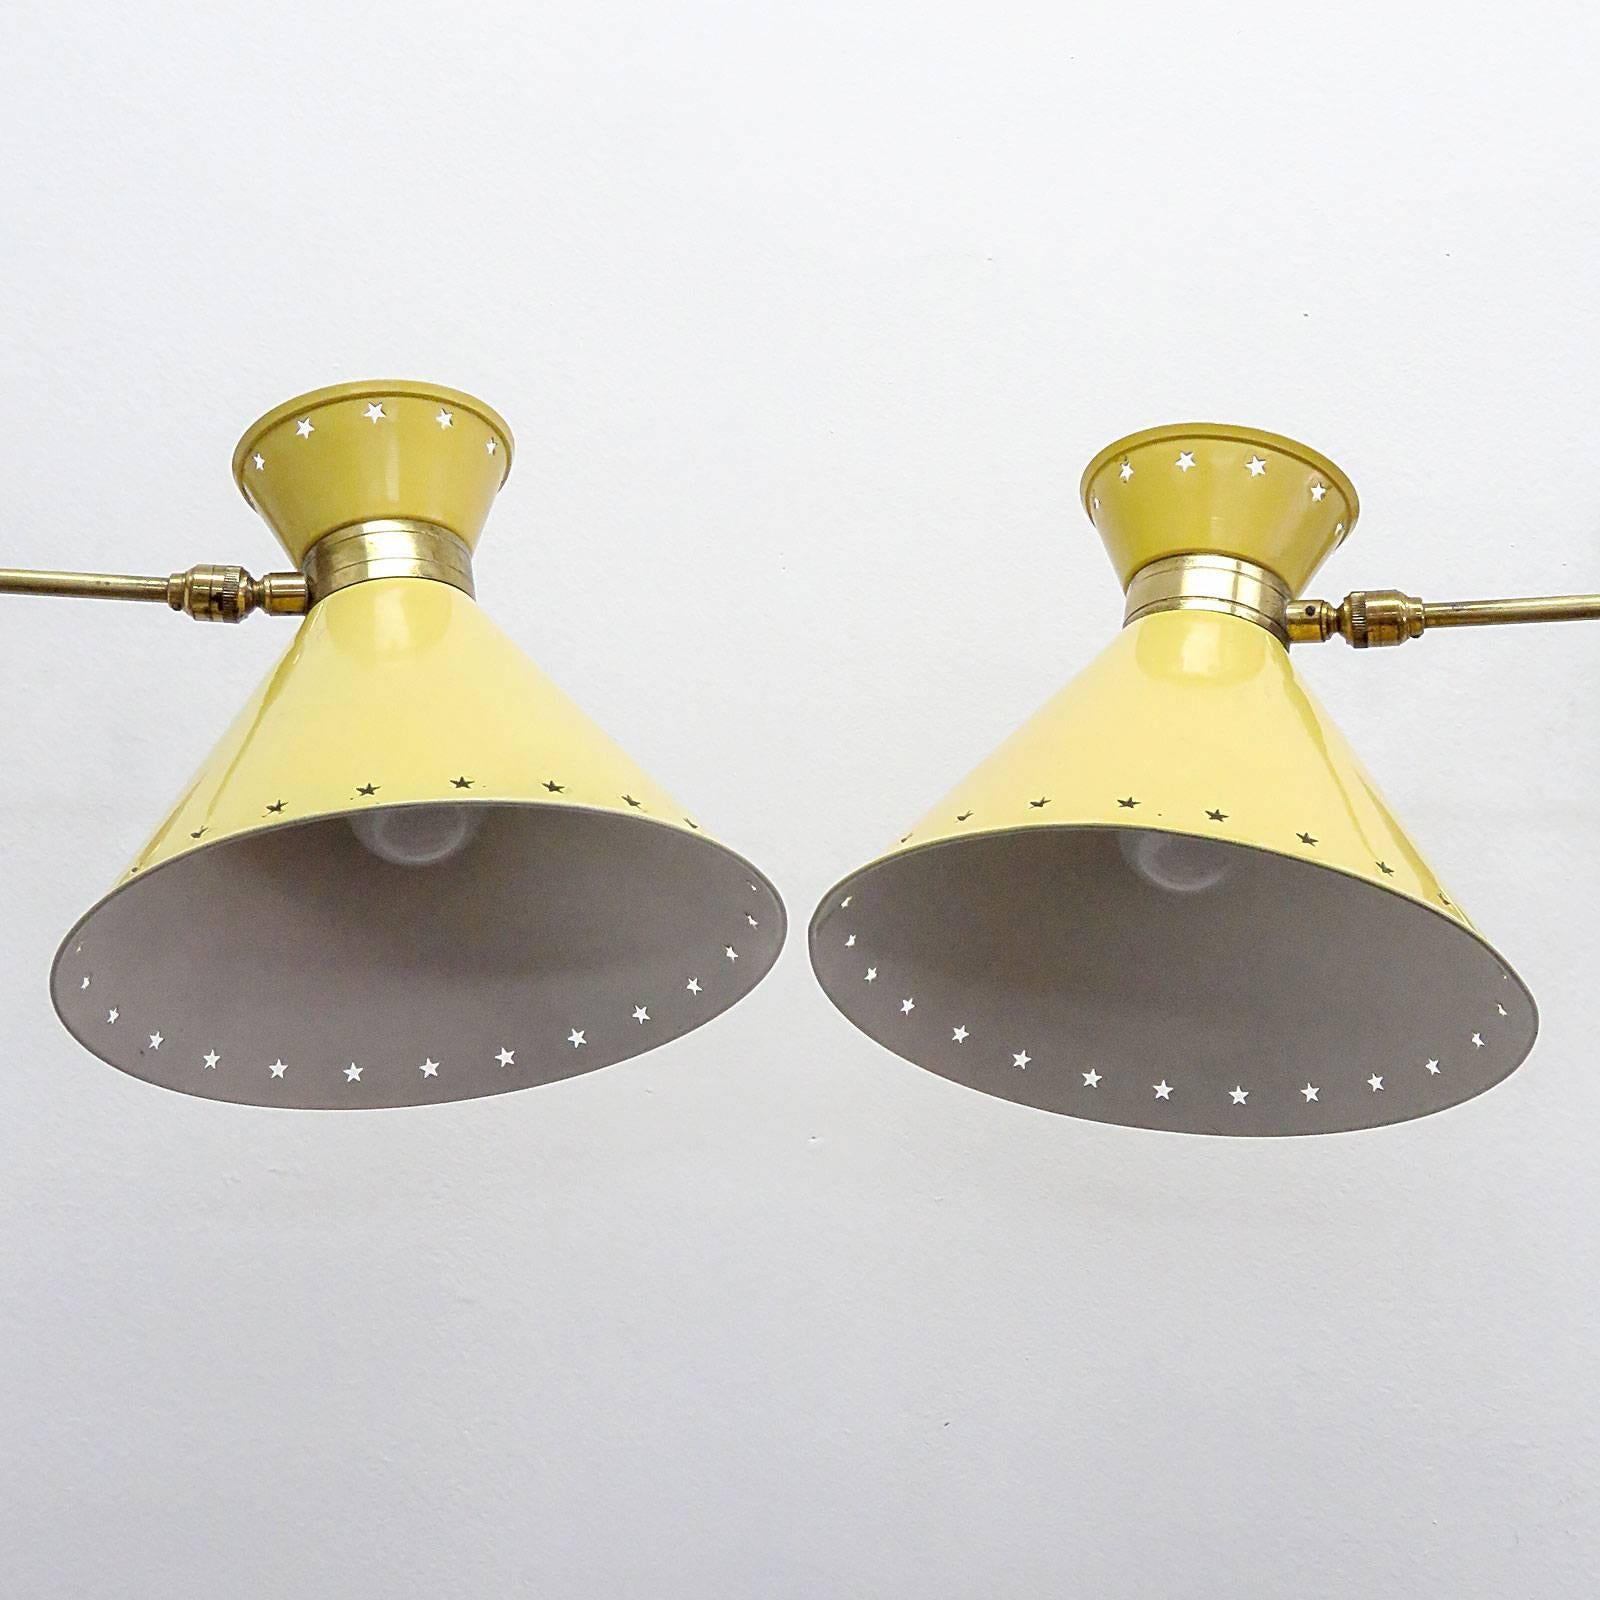 Mid-20th Century Pair of Swing Arm Sconces by Rene Mathieu for Lunel